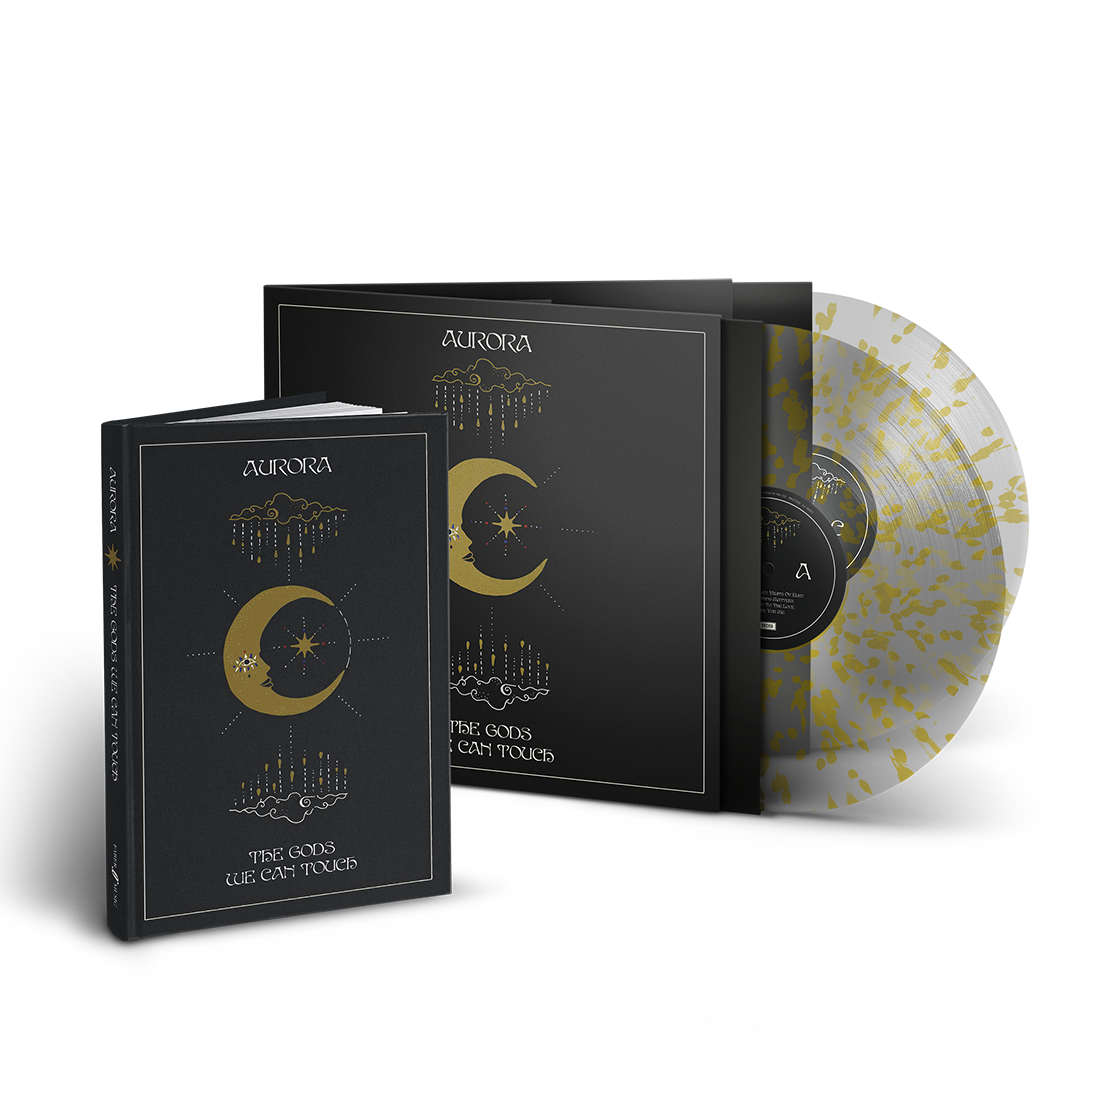 Aurora Store Exclusive: The Gods We Can Touch Book + Clear and Gold Splatter 2LP Vinyl